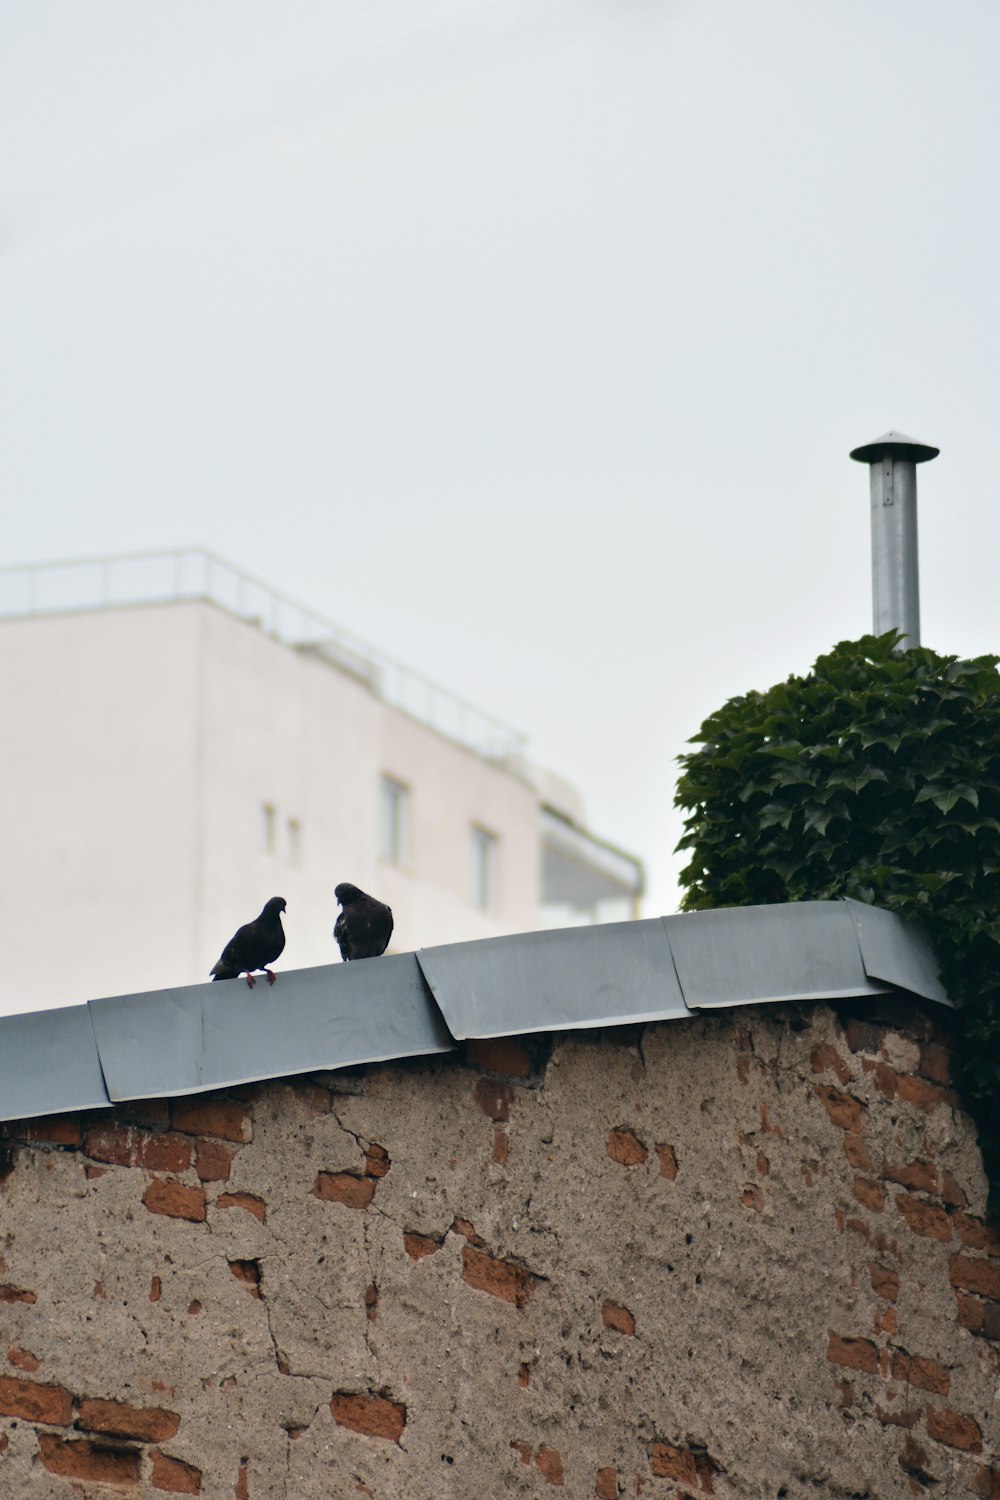 two black birds on gray concrete wall during daytime